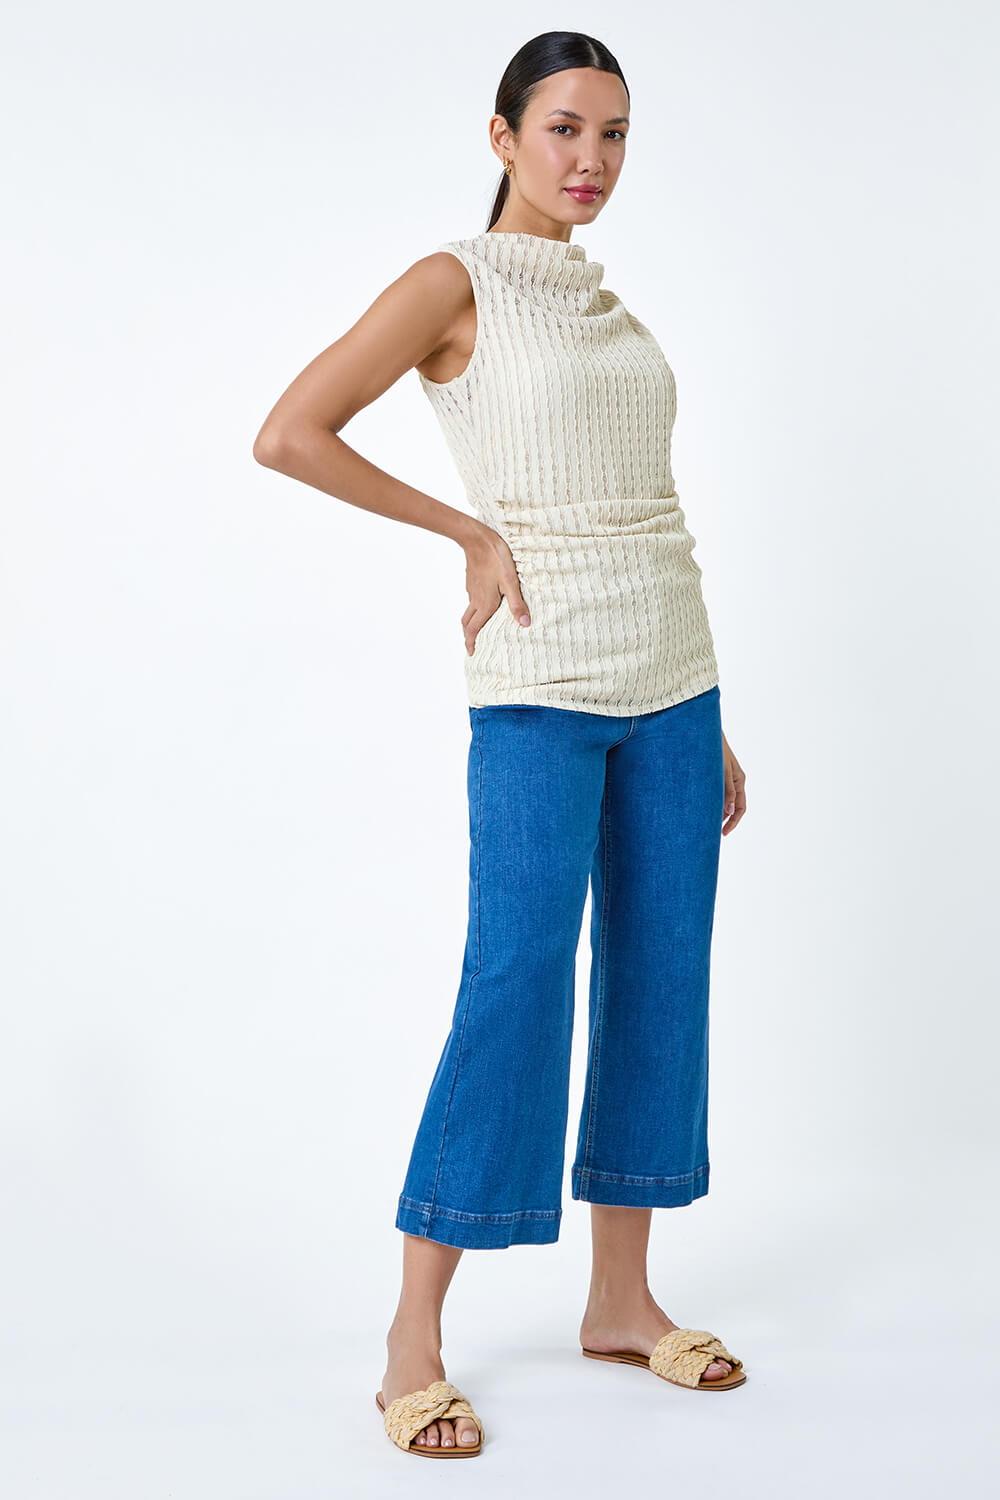 Natural  Textured High Neck Sleeveless Stretch Top, Image 4 of 5